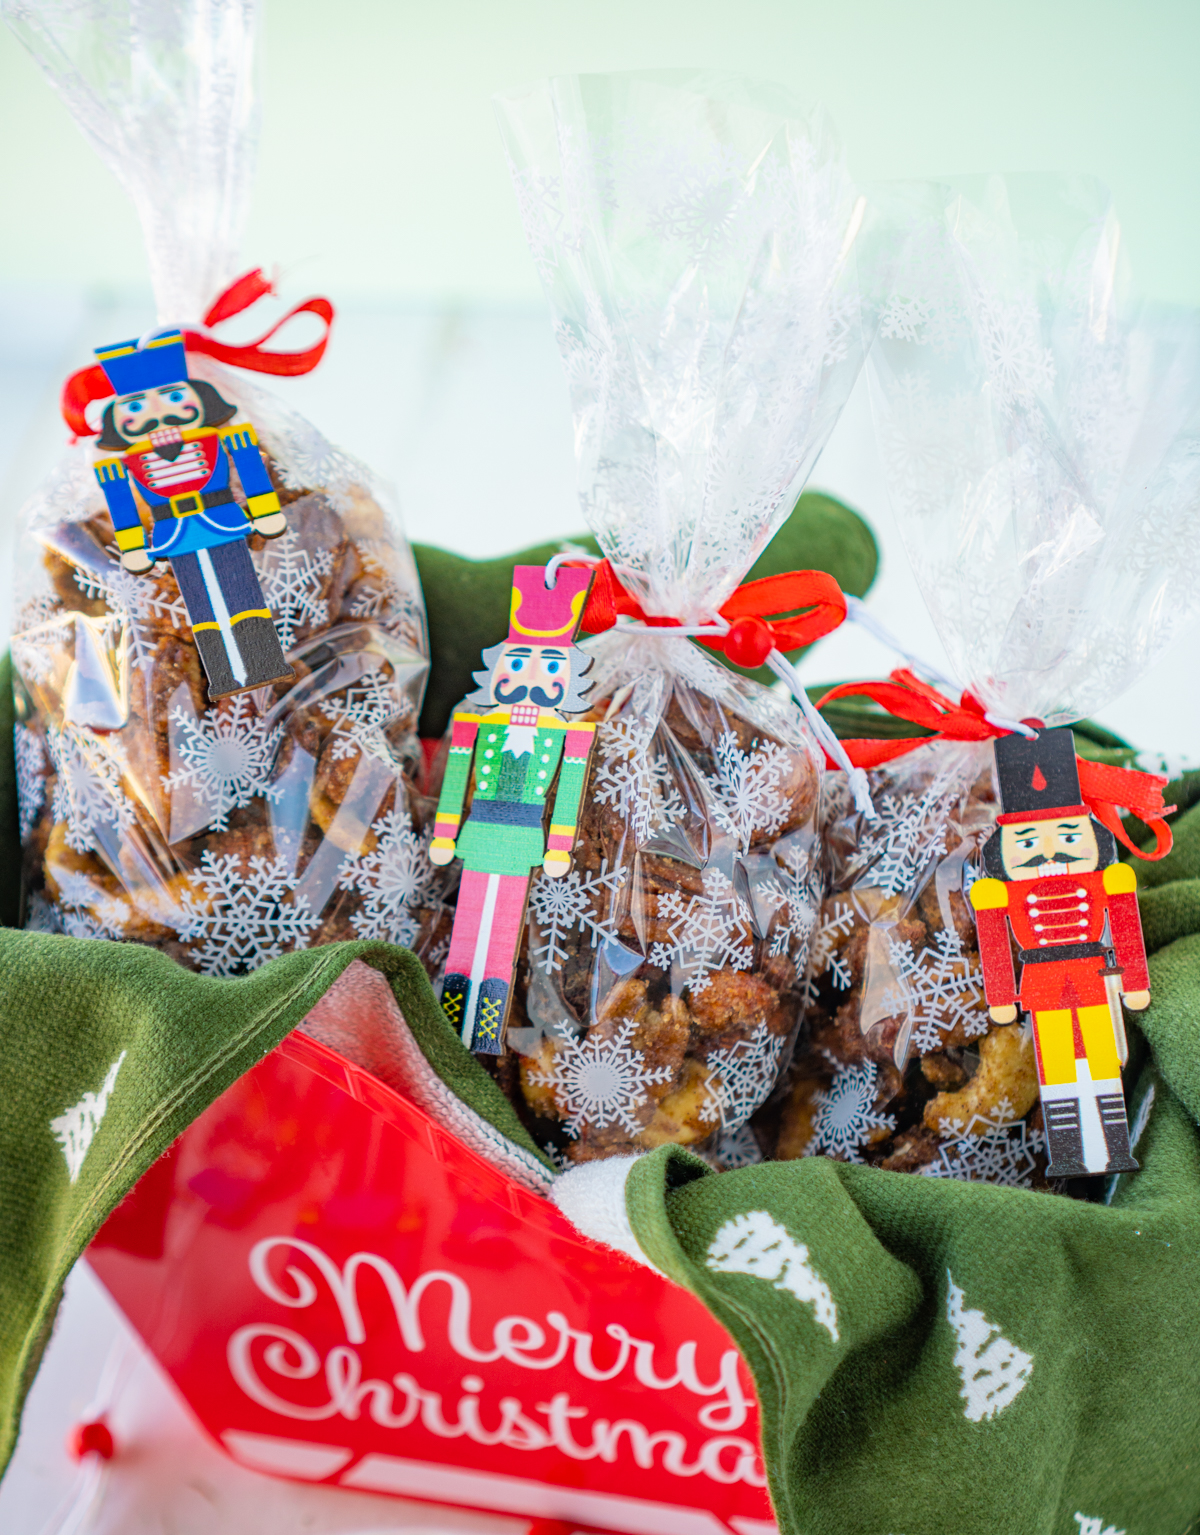 Santa's sleigh filled with bags of candied nuts